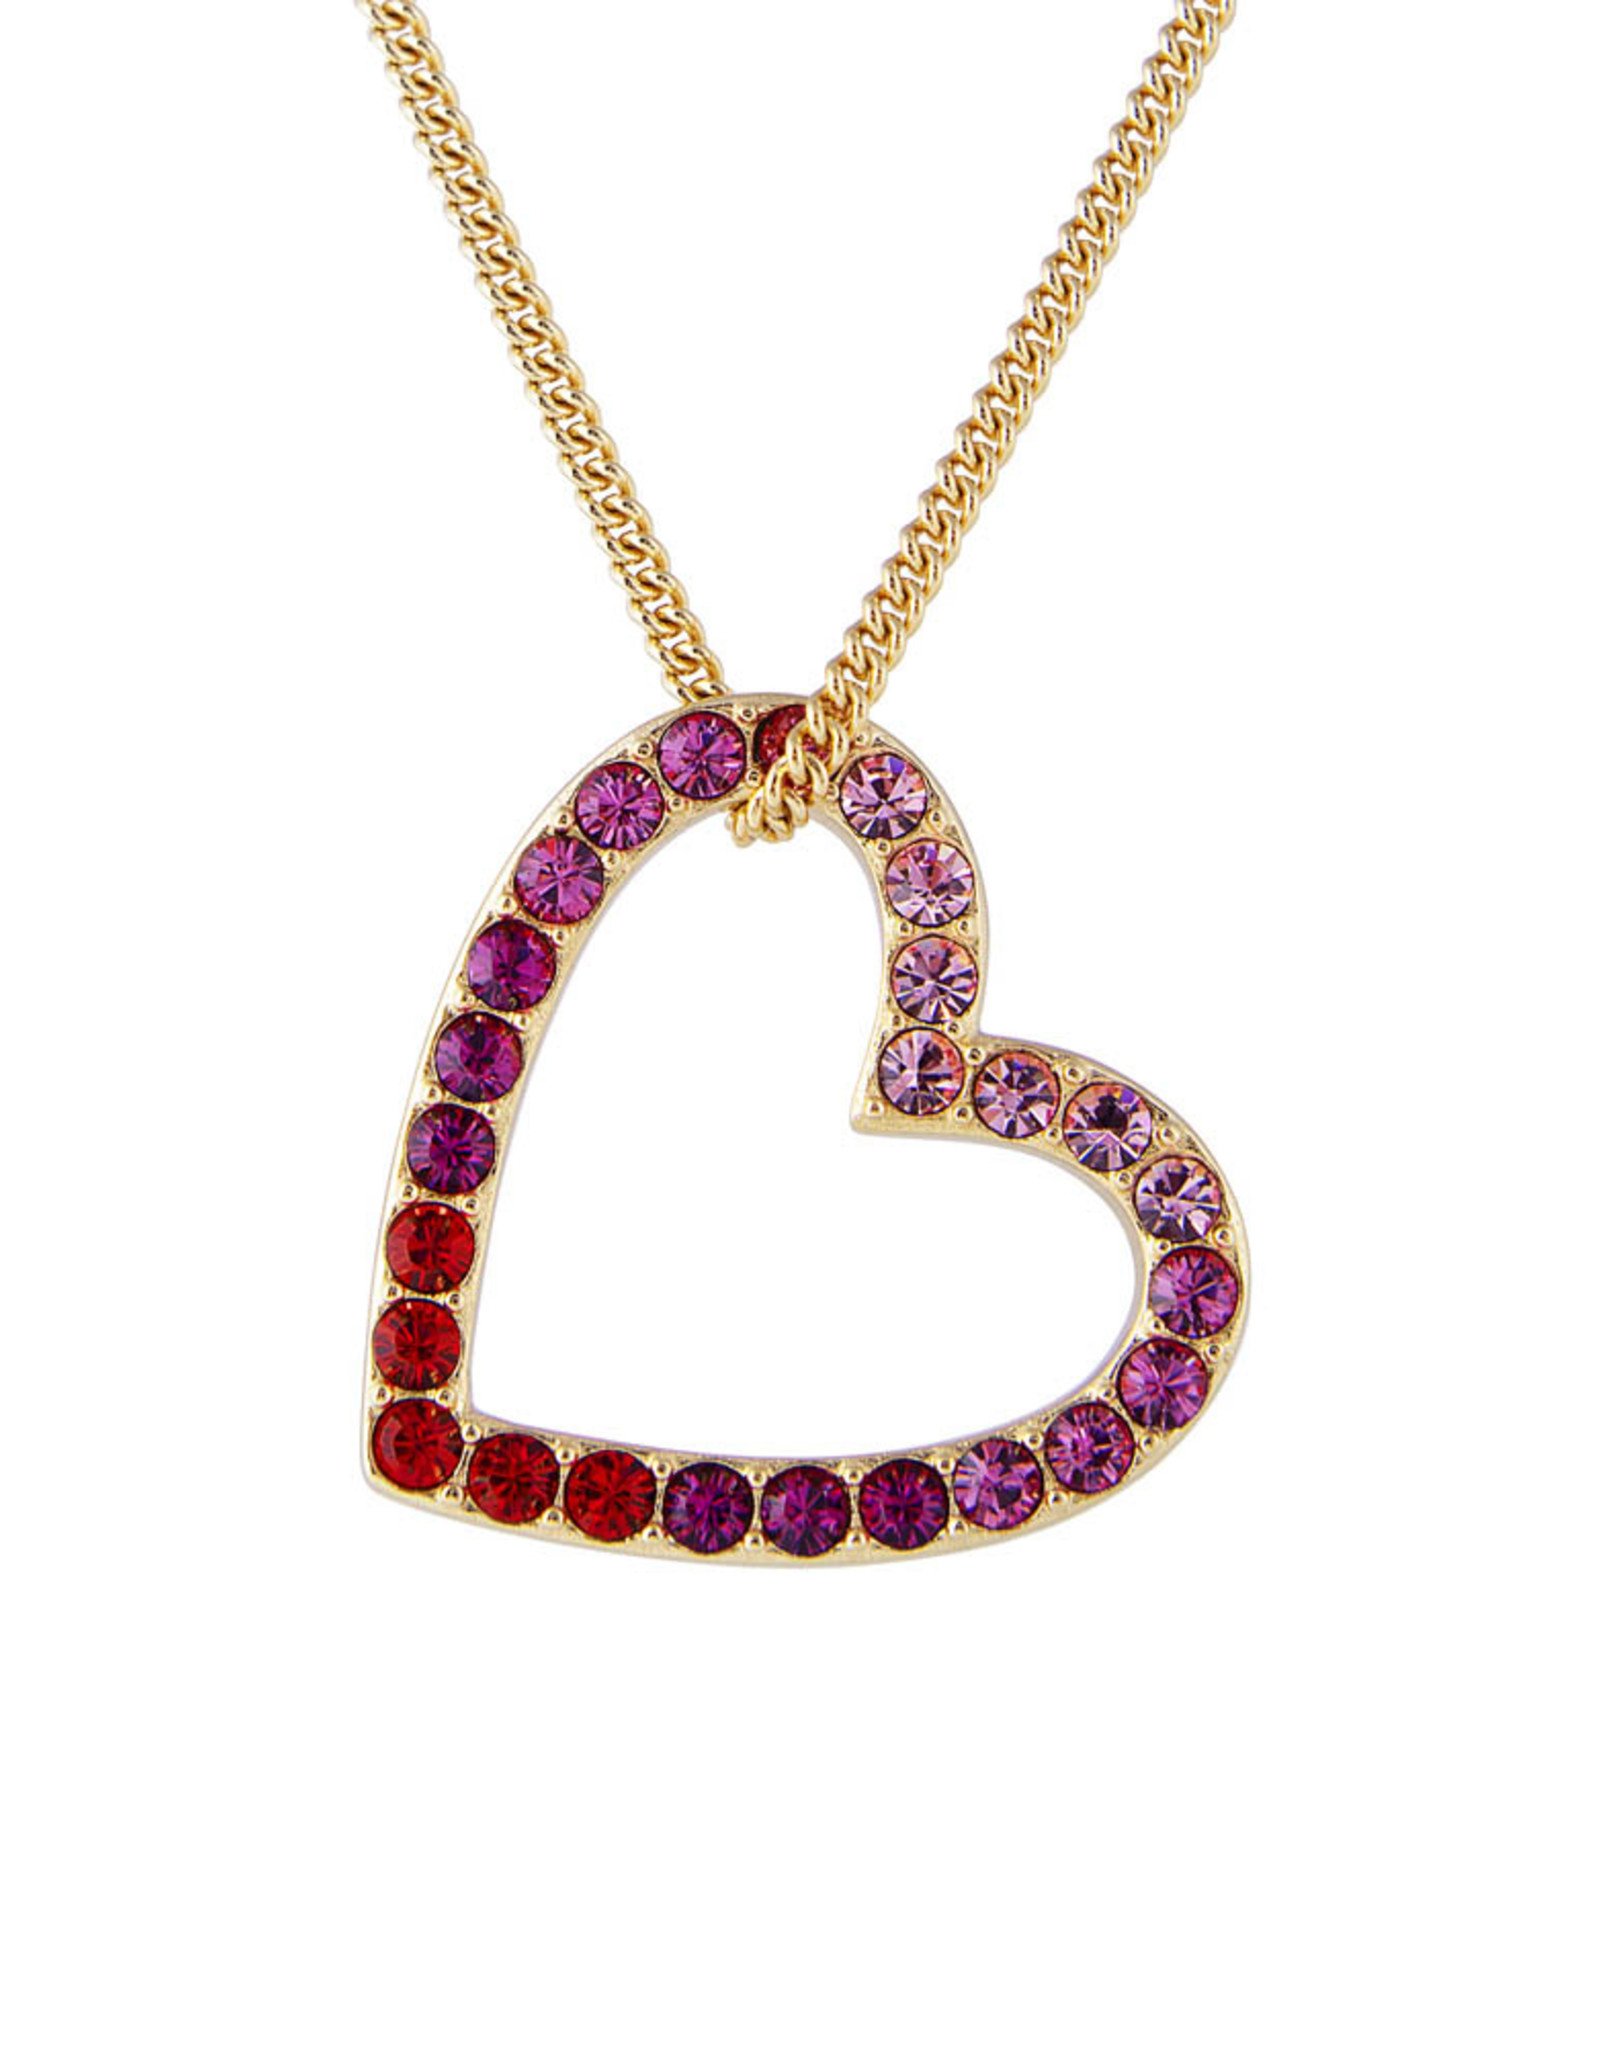 FAIRLEY PINK OMBRE HEART NECKLACE